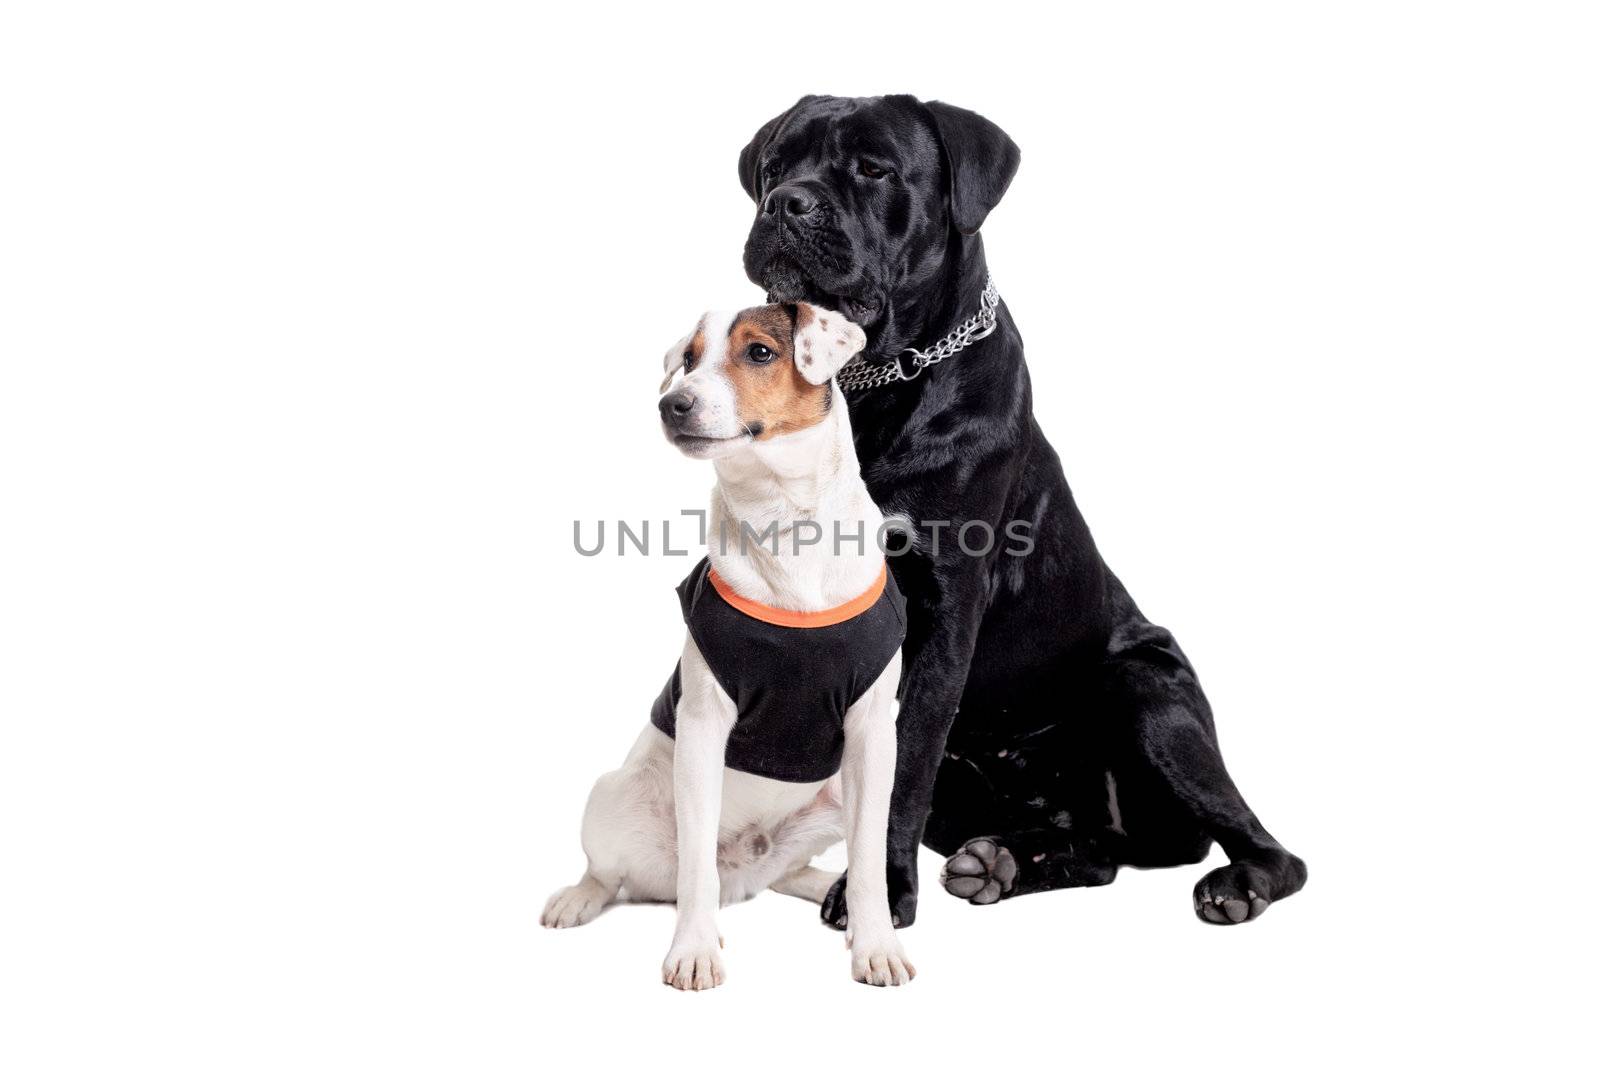 Jack Russel Terrier and Cane Corso by kokimk